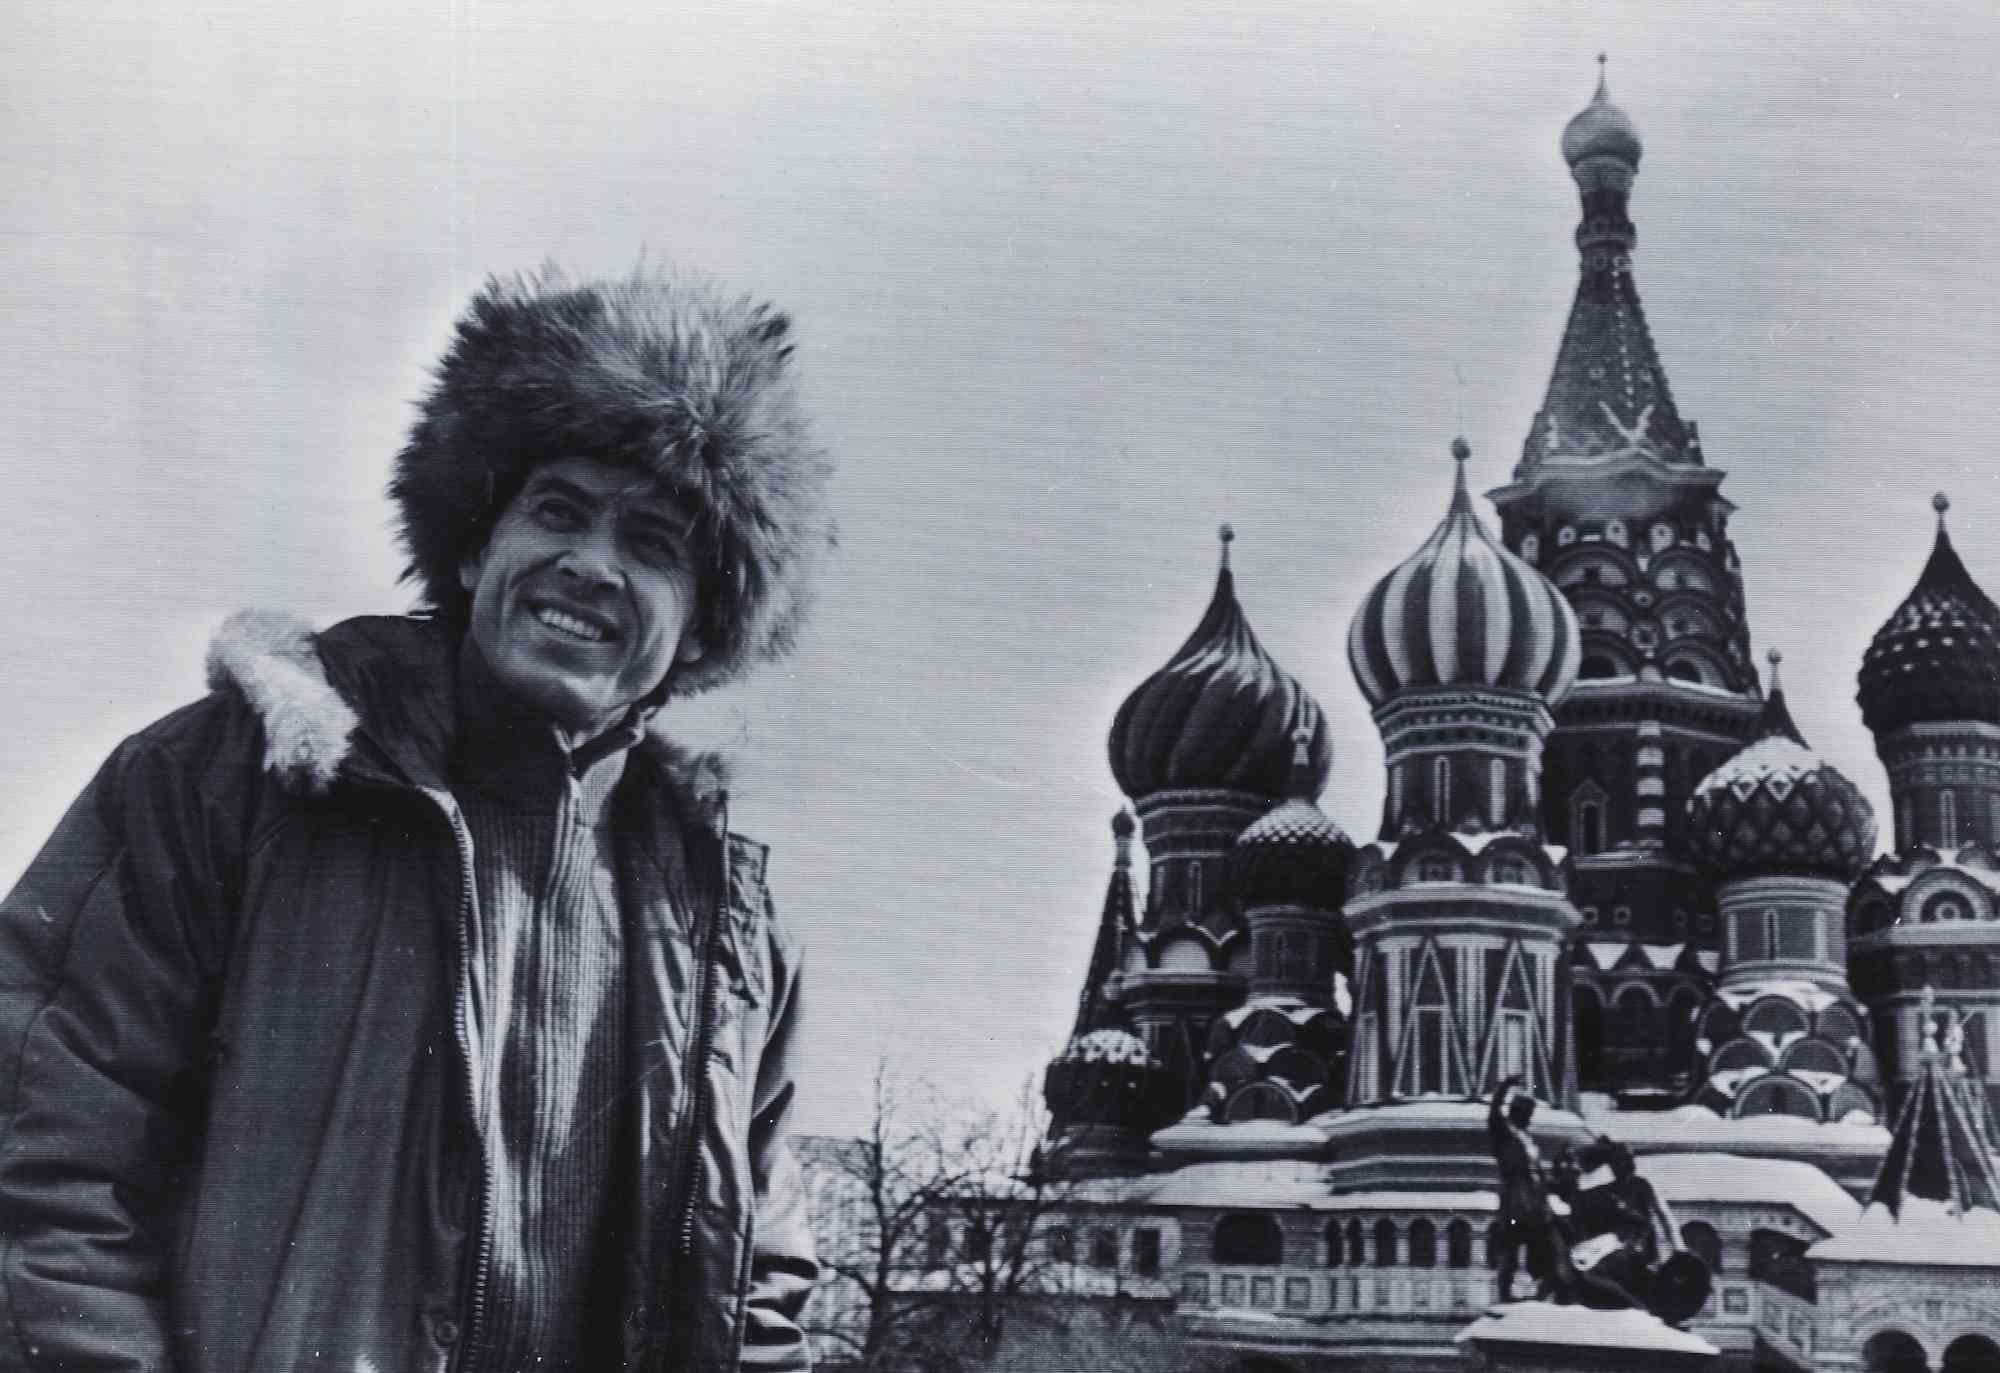 Unknown Landscape Photograph - Gianni Morandi in Moscow - Vintage Photo - 1980s